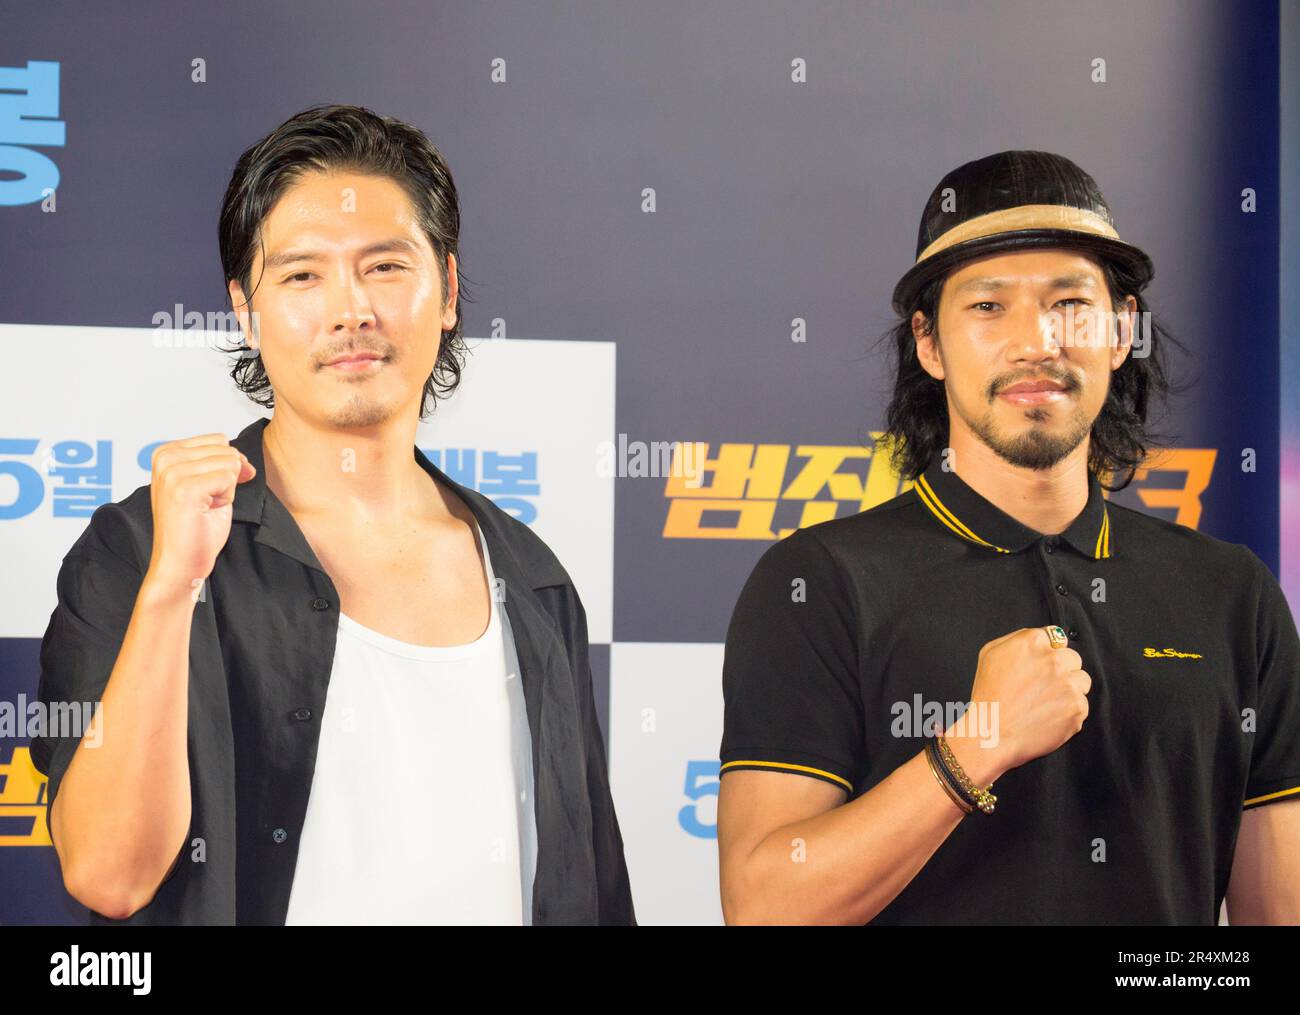 Lee Tae-Kyu and Kim Min, May 22, 2023 : (L-R) South Korean actors Lee Tae-Kyu and Kim Min attend a photocall before a VIP preview of South Korean movie 'The Roundup: No Way Out' in Seoul, South Korea. 'The Roundup: No Way Out', the third installment of 'The Outlaws' series will hit local theaters on May 31. Credit: Lee Jae-Won/AFLO/Alamy Live News Stock Photo